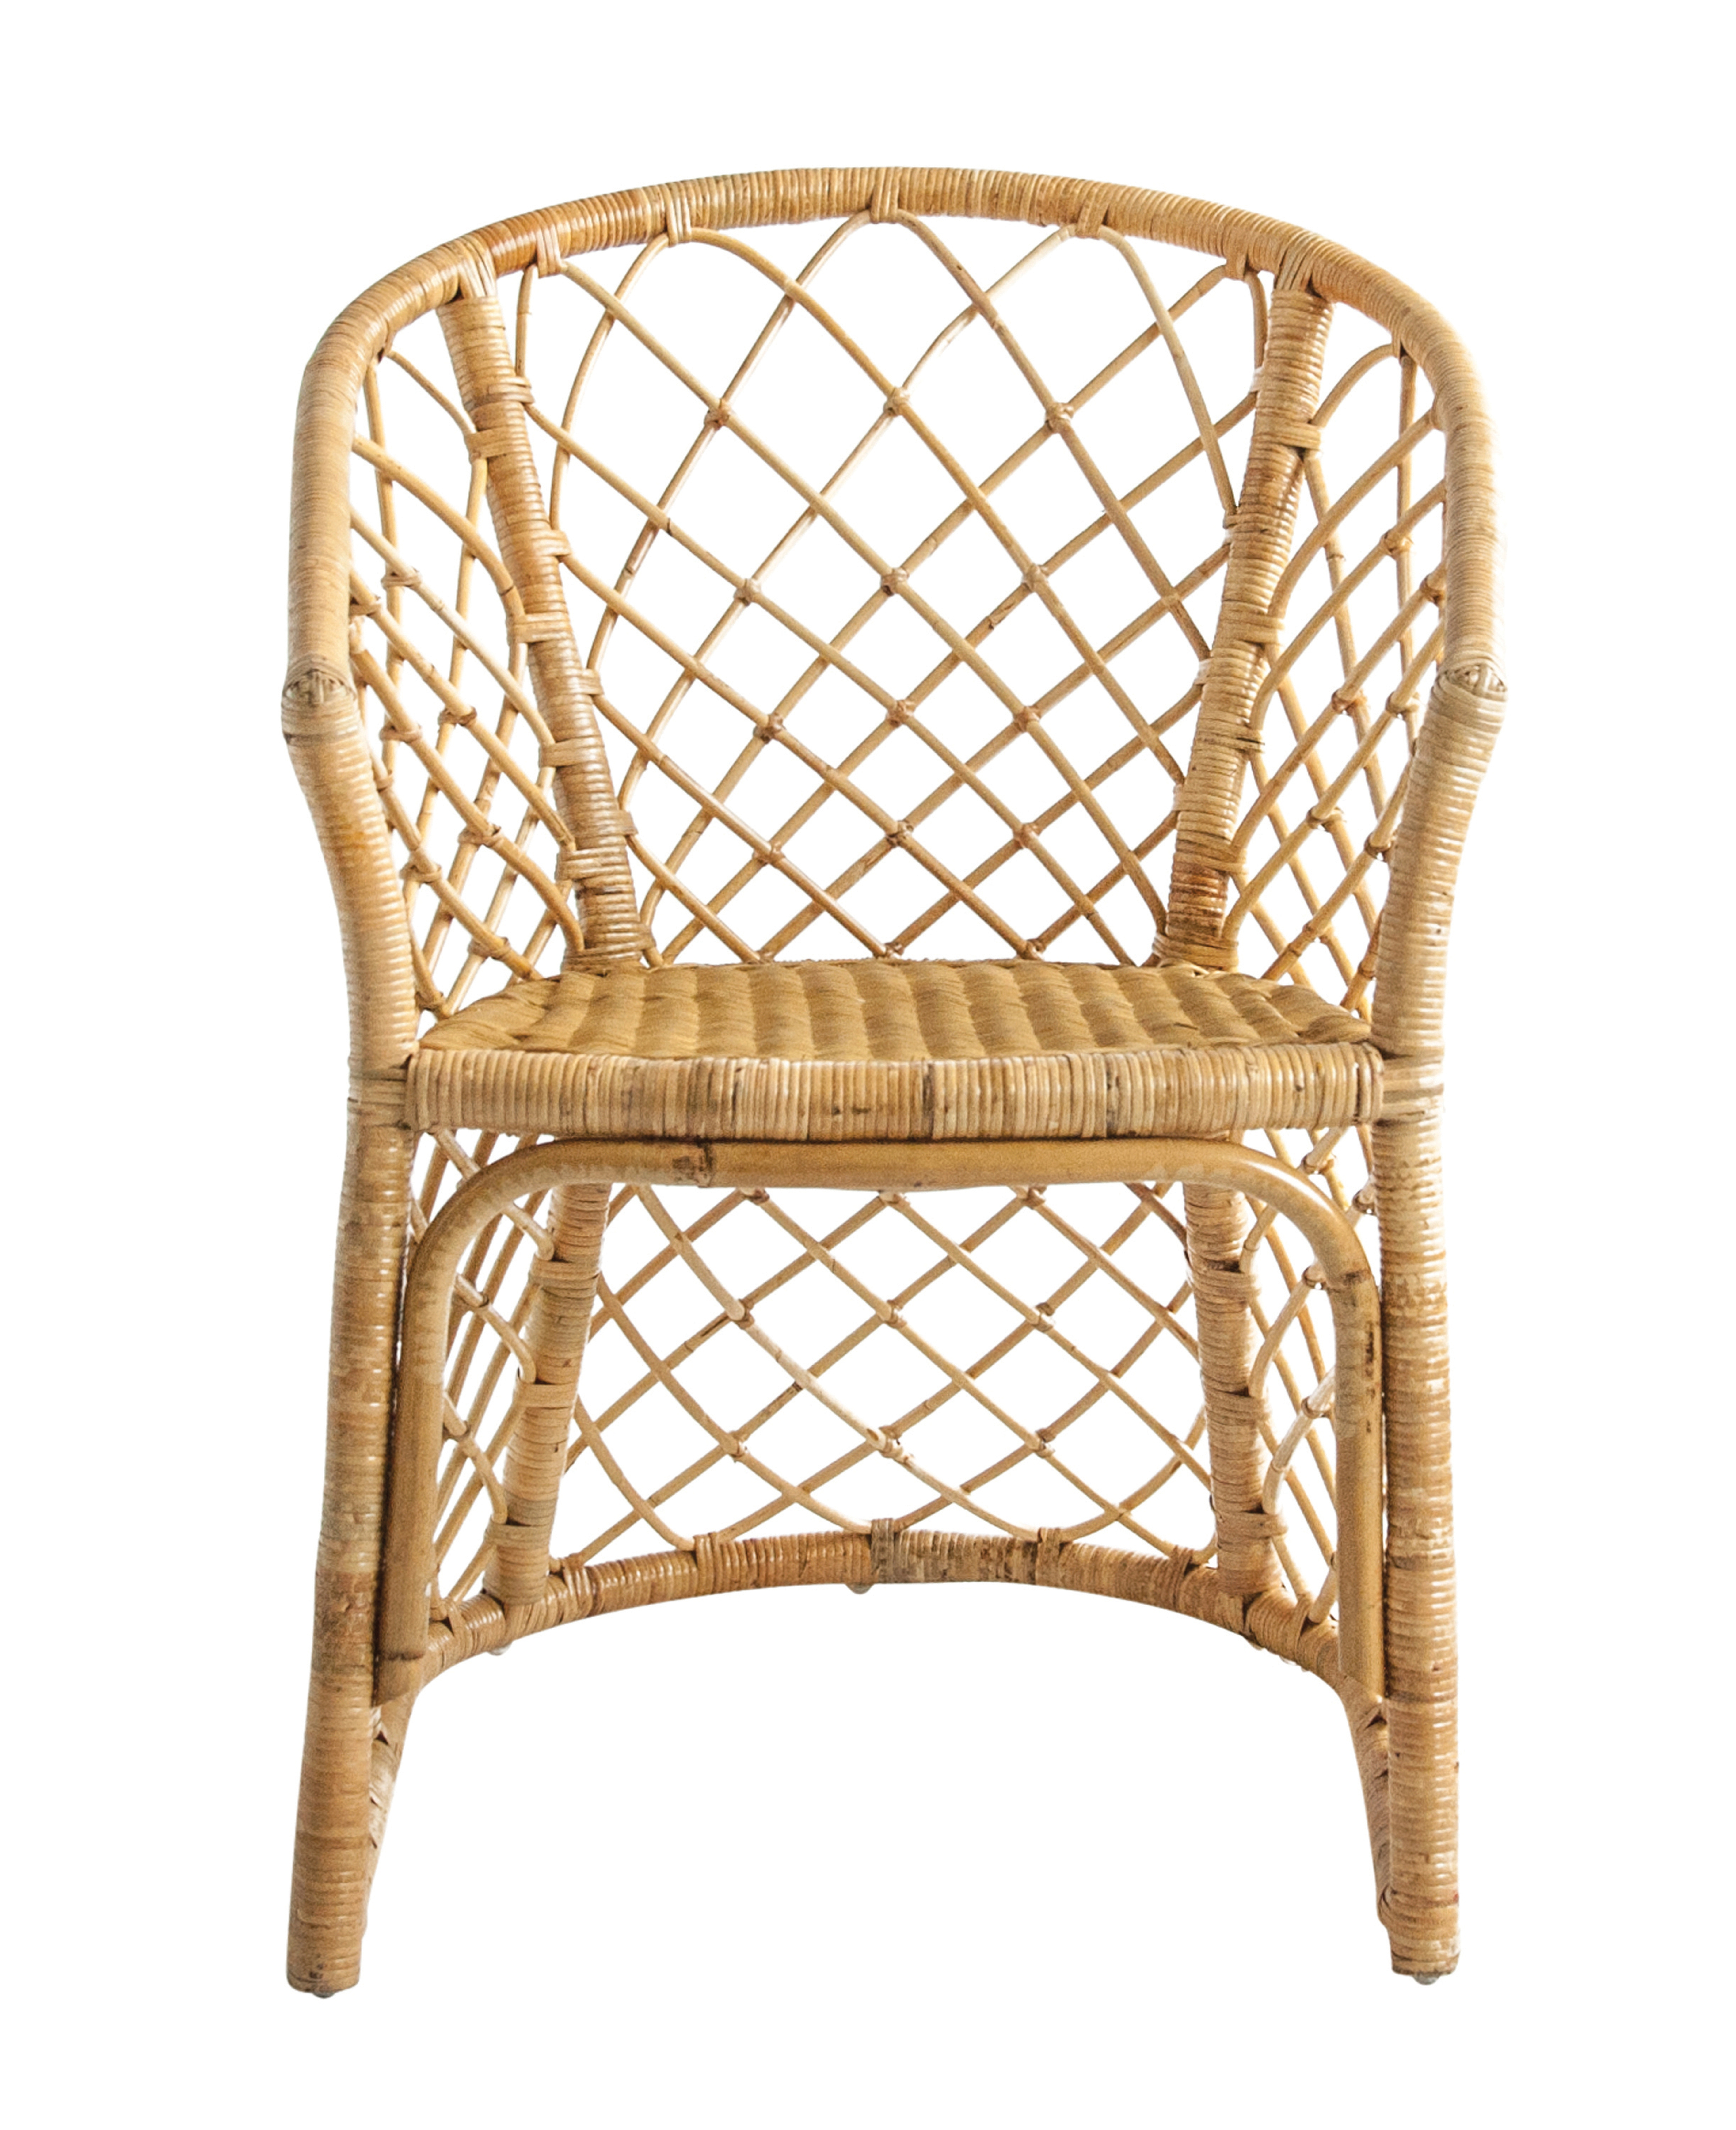 Handwoven Beige Rattan Arm Chair - Nomad Home